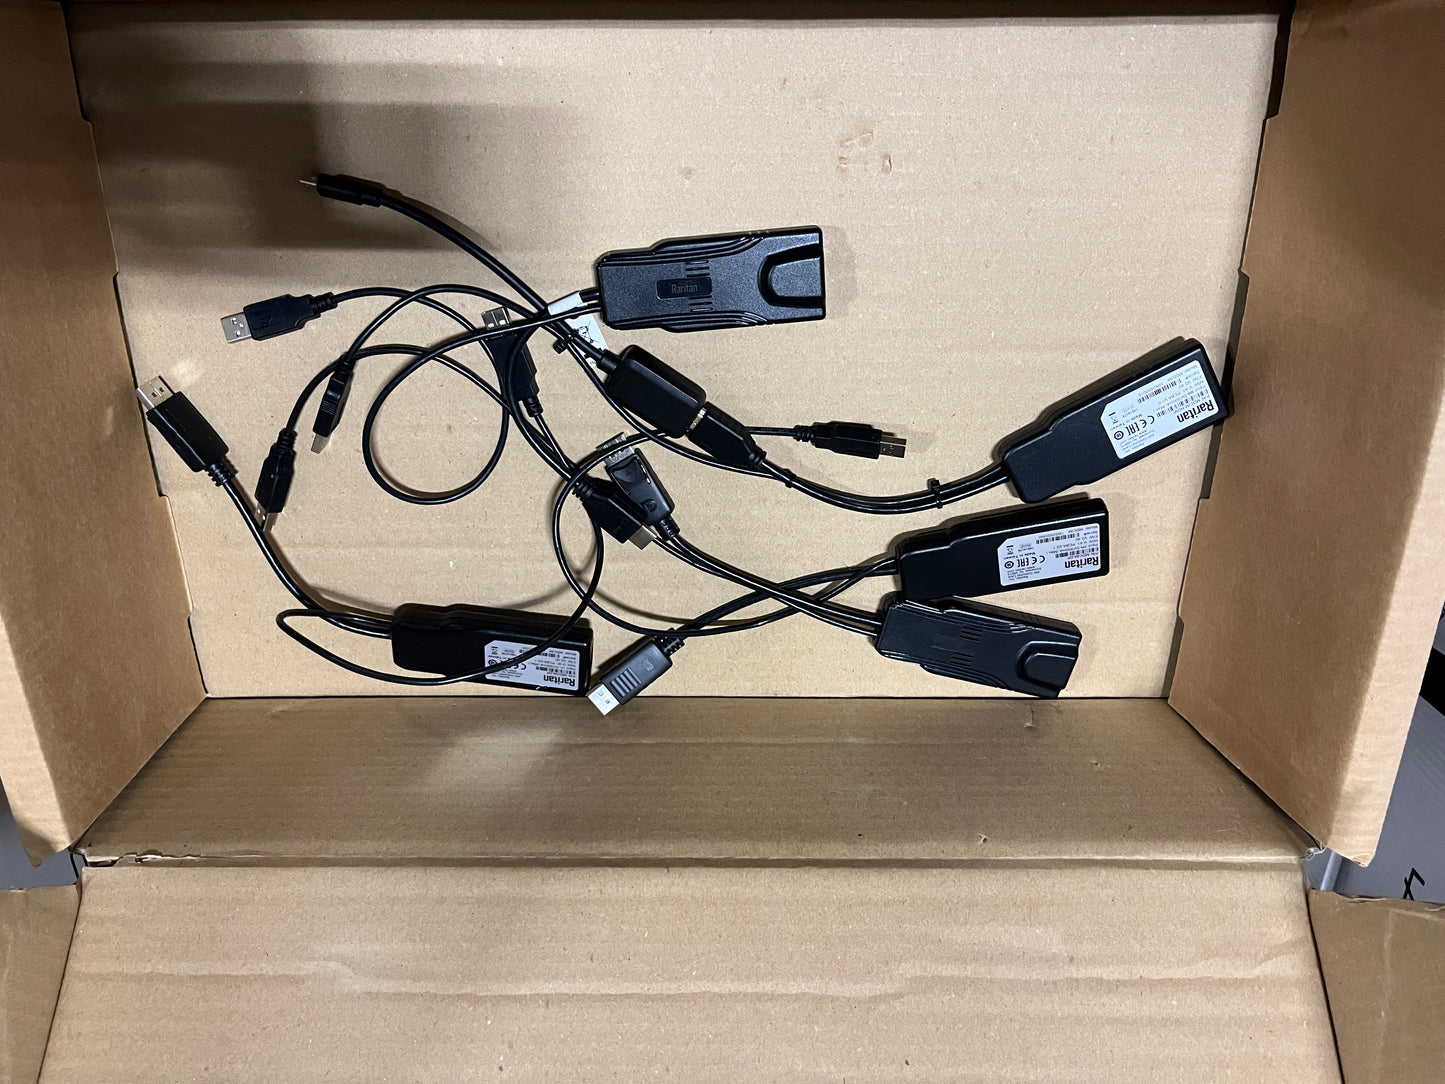 New Raritan MasterConsole MCD-216 CAT5 KVM Switch for Sale. We Sell Professional Audio Equipment. Audio Systems, Amplifiers, Consoles, Mixers, Electronics, Entertainment, Sound, Live.